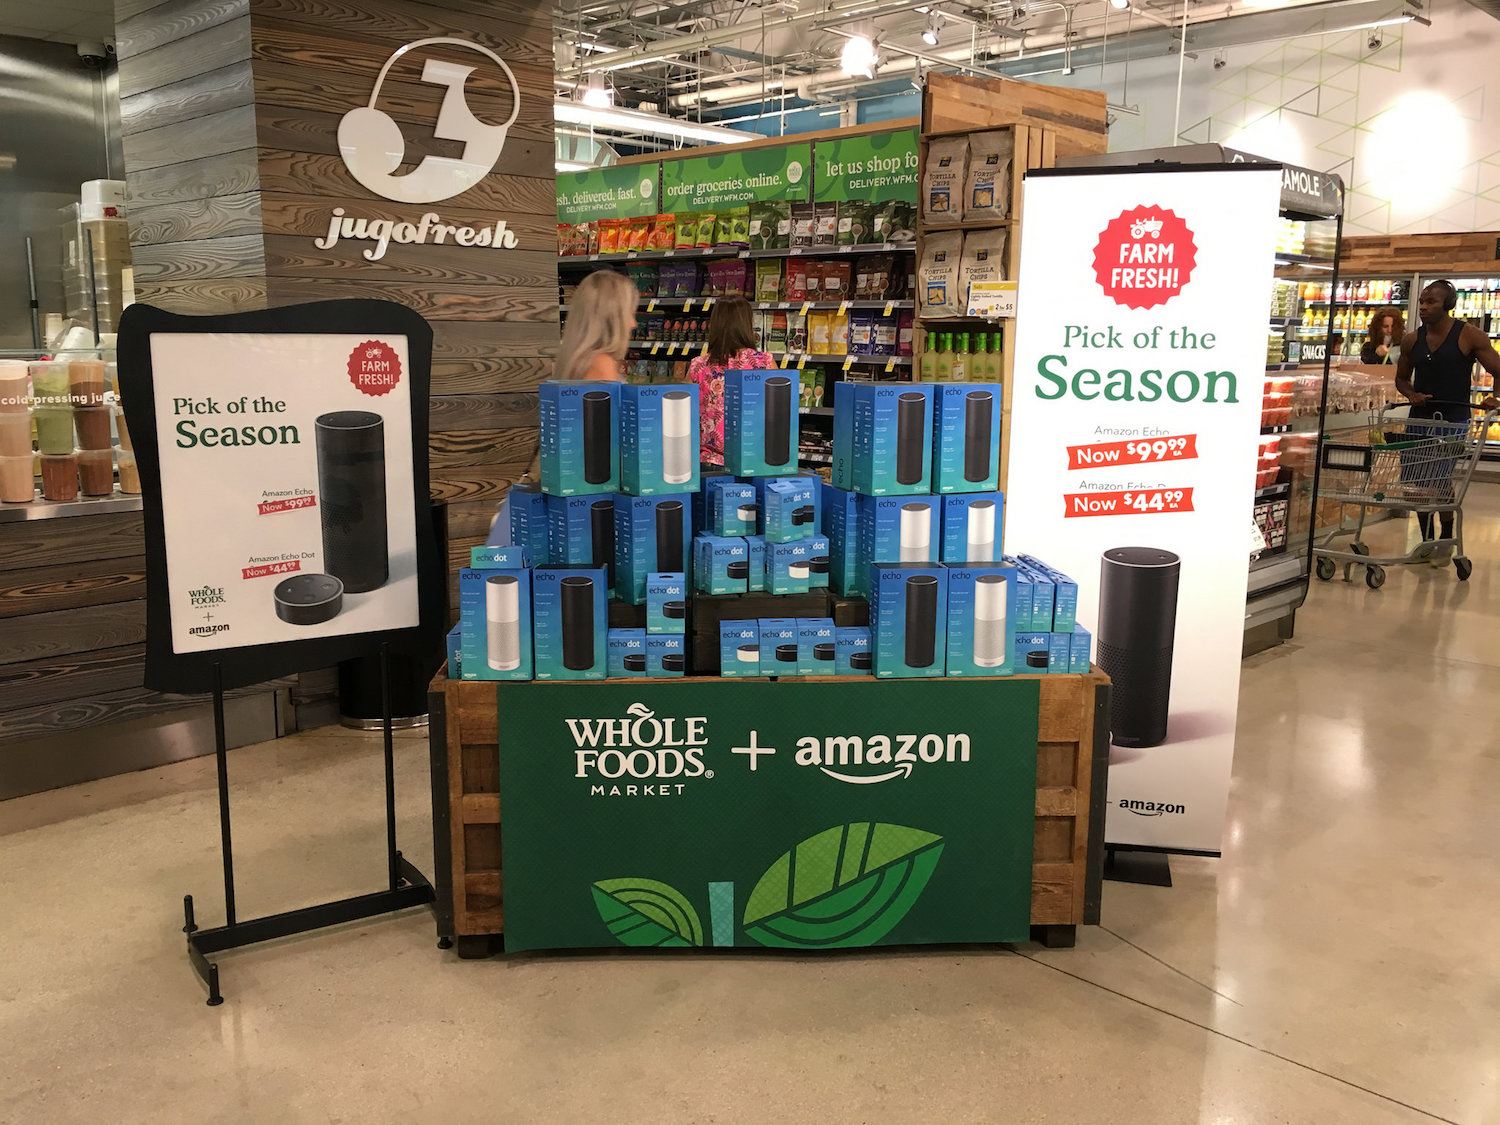 Amazon's effect on pricing at Whole Foods / a stack of Amazon Echoes